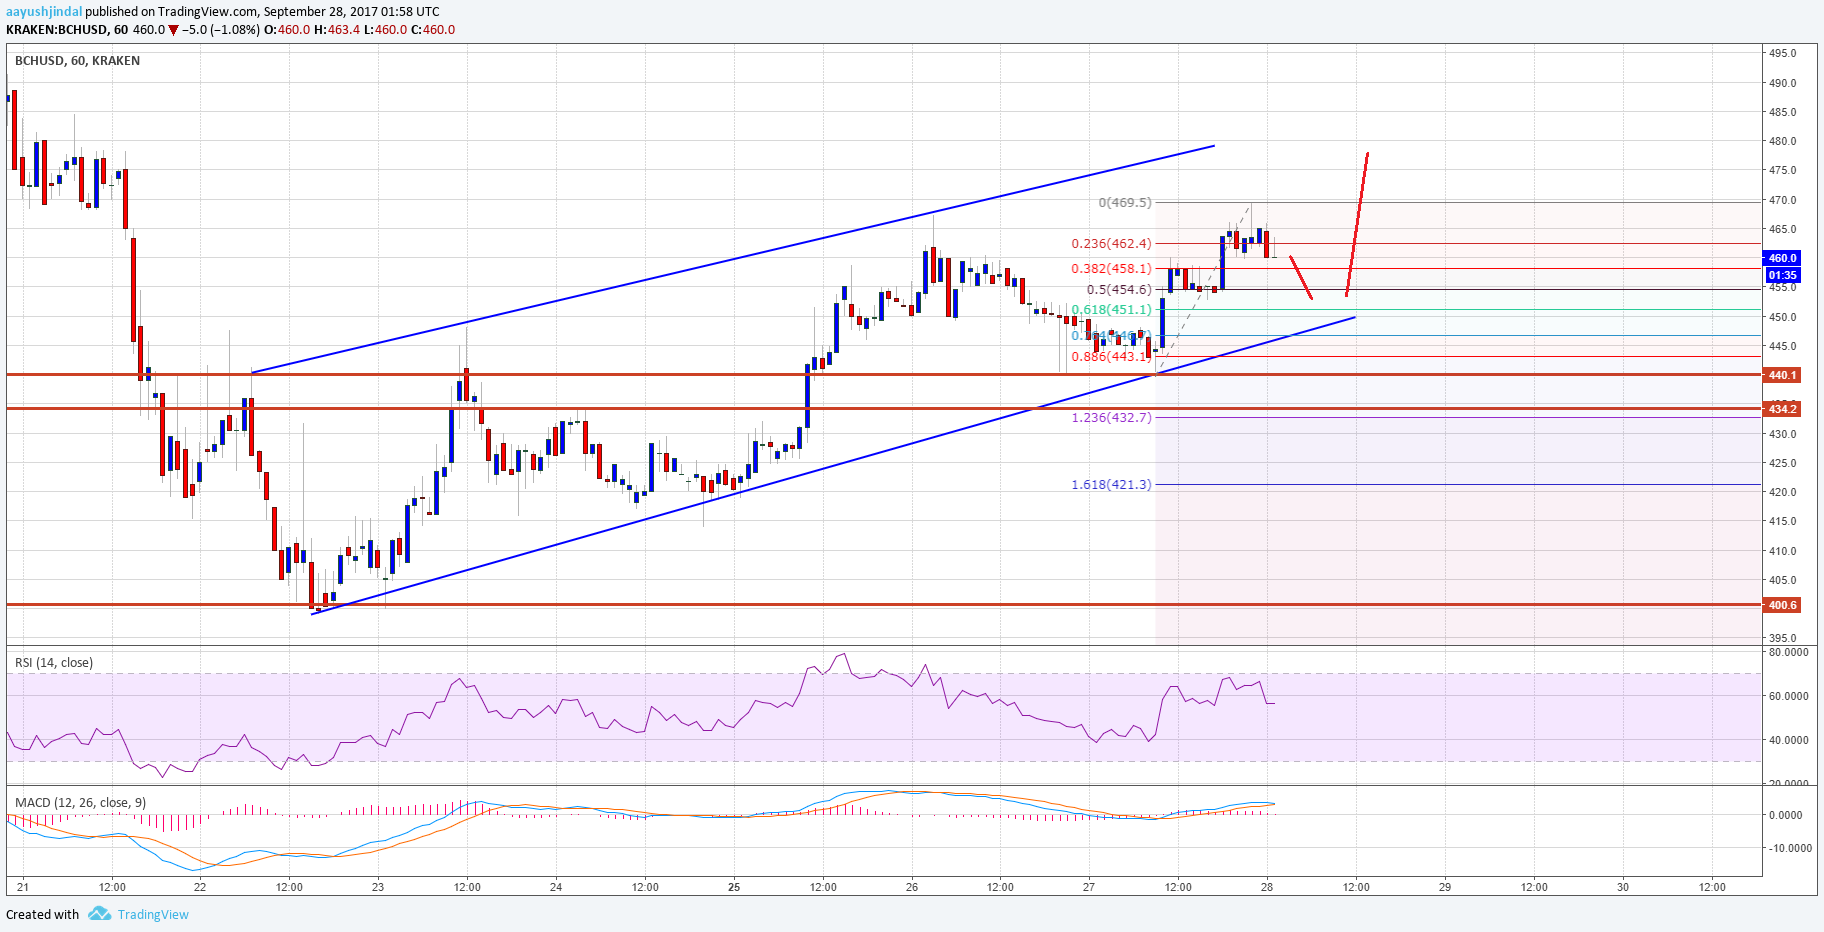 Bitcoin Cash Technical Analysis – BCH/USD Remains in Uptrend